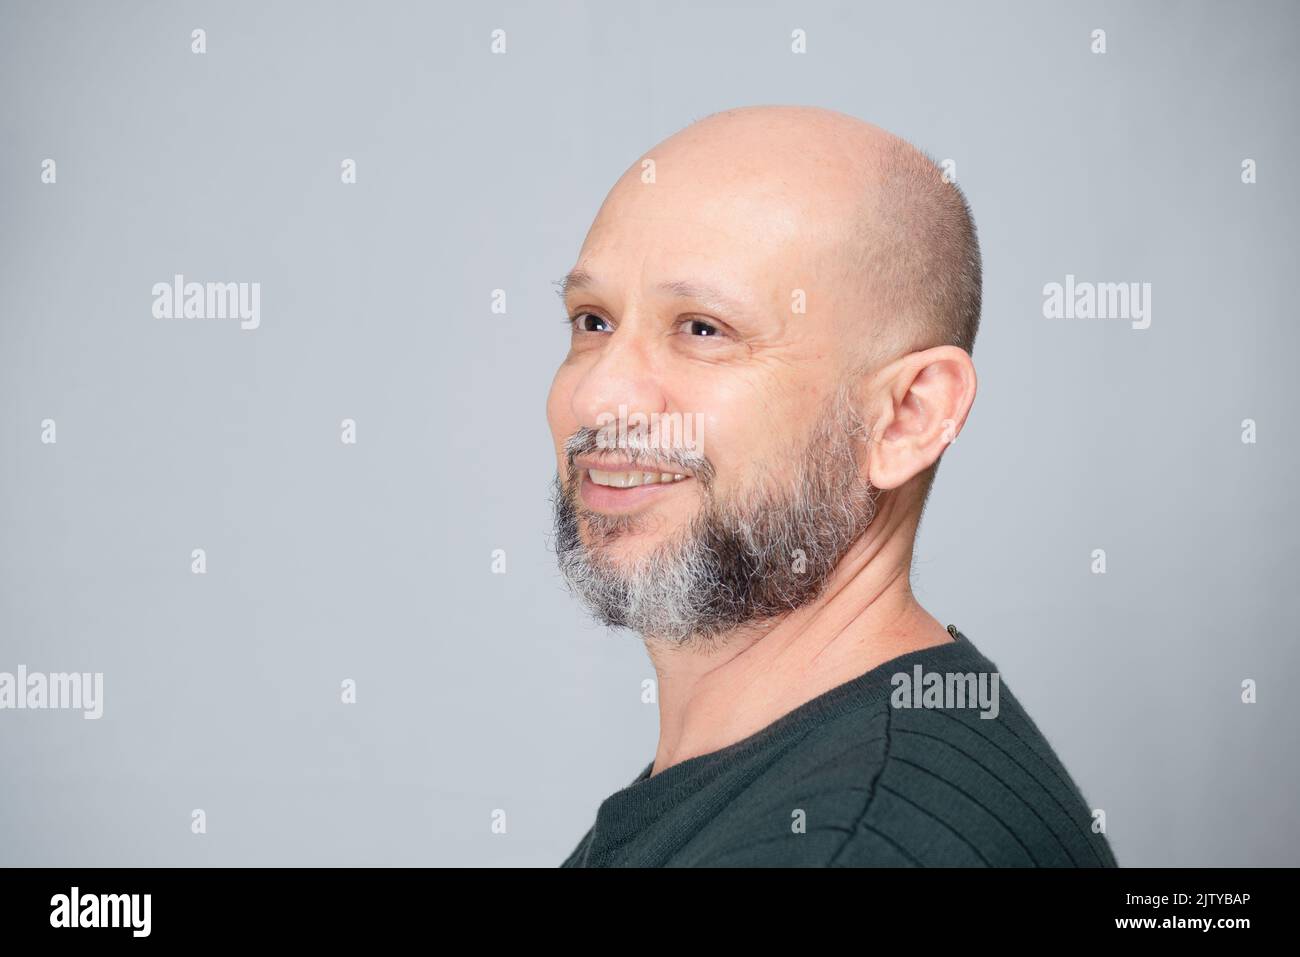 Portrait of mature man standing on light background. Bald bearded man. Formal style. Stock Photo